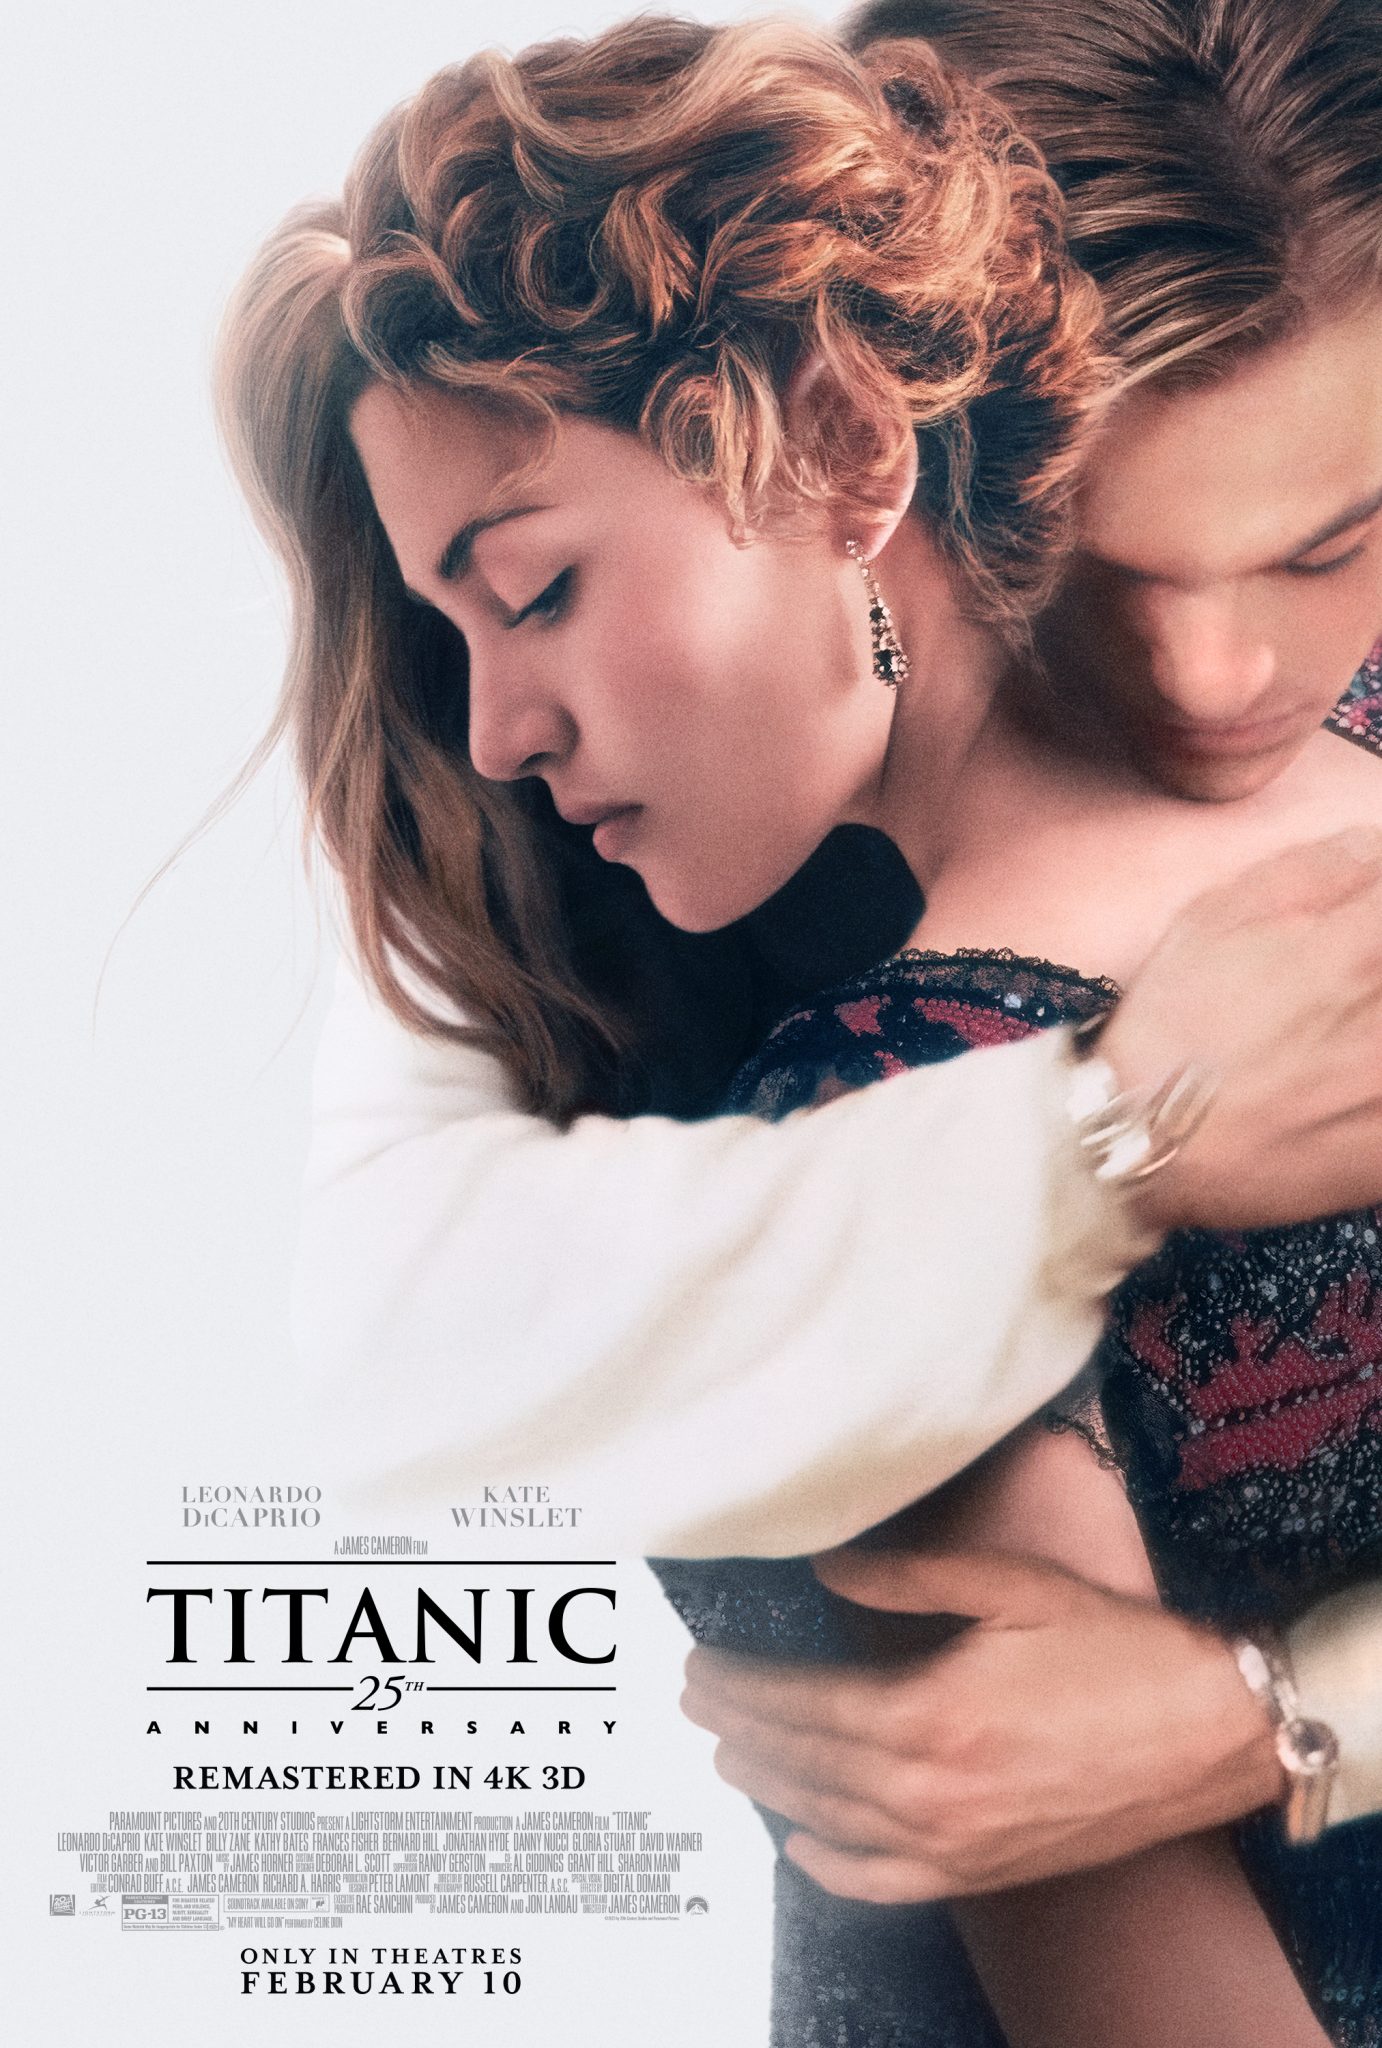 The Titanic Celebrates Its 25th Anniversary In Theaters This February